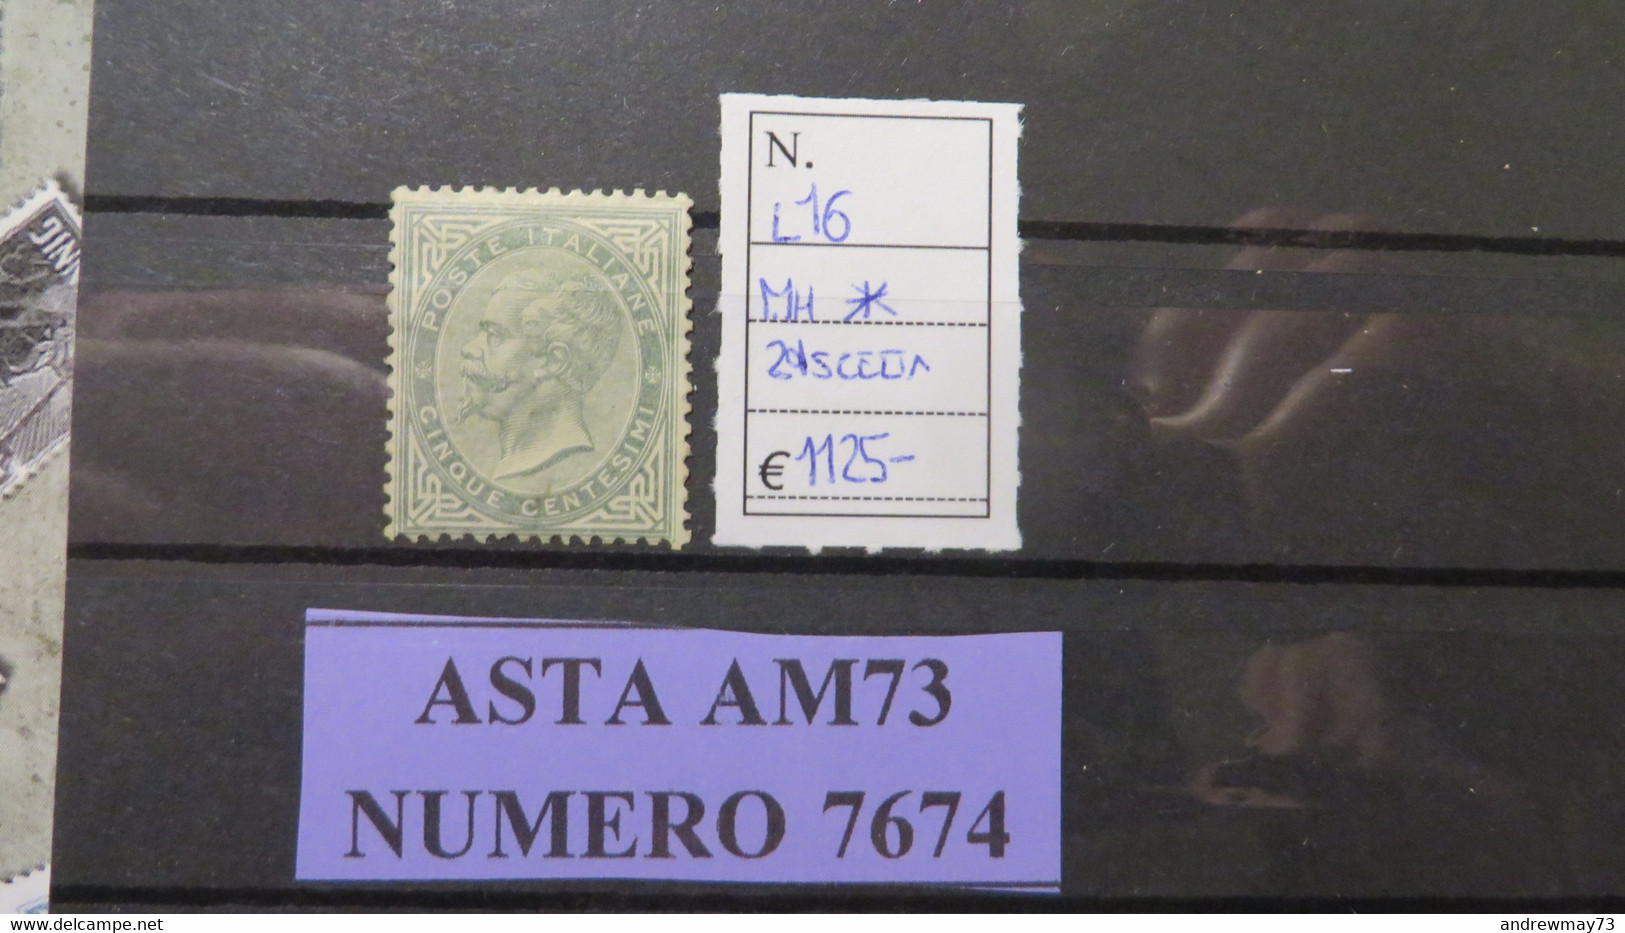 ITALY KINGDOM- NICE MH RARE STAMP- 2ND CHOICE- 1125 € ON CATALOGUE - Mint/hinged